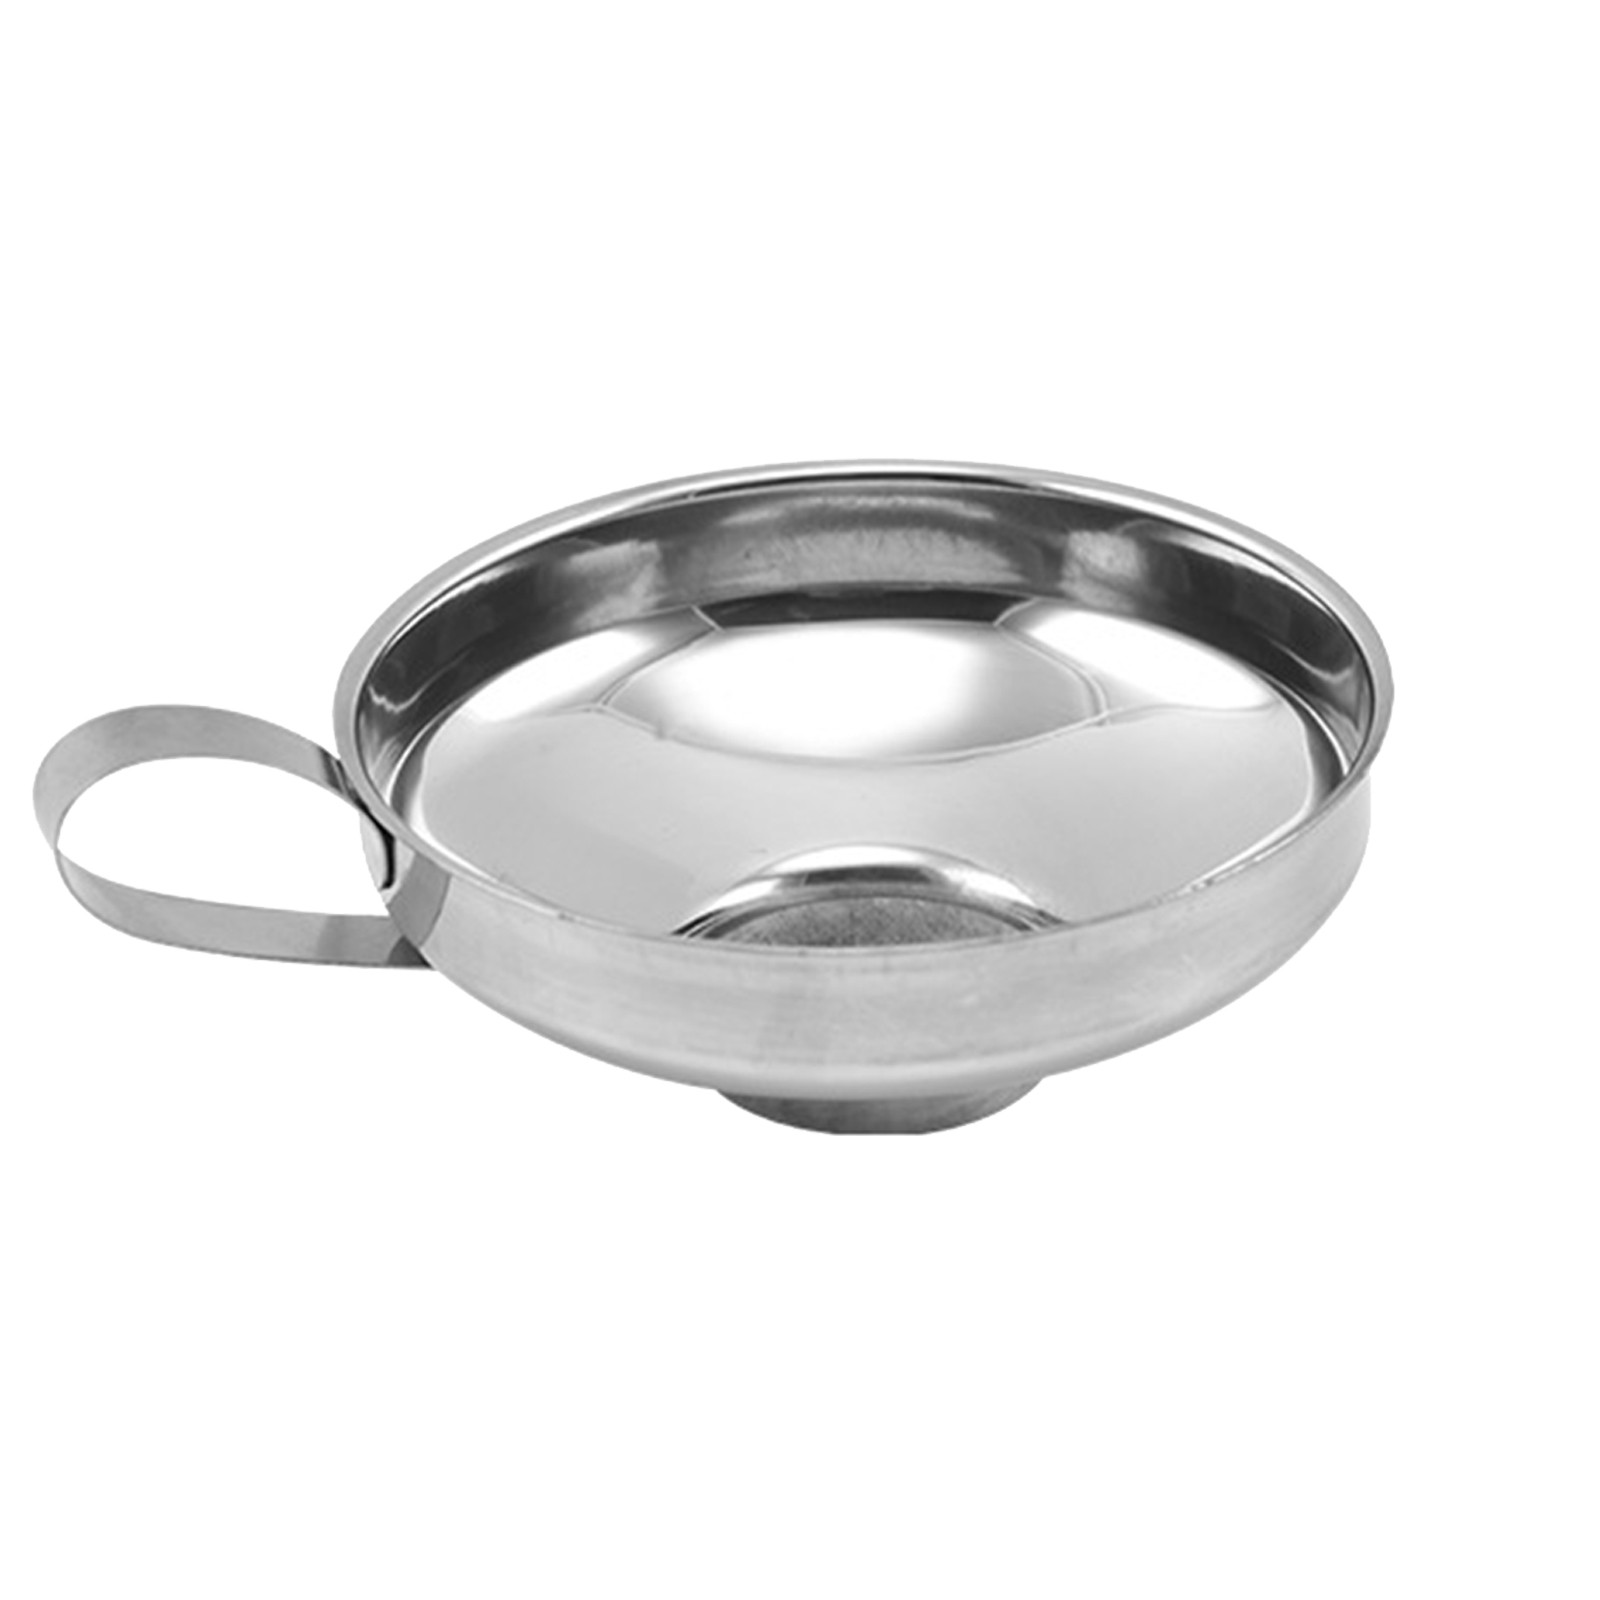 WANYNG Stainless Steel Canning Funnel Wide Mouth Wide Mouth Jar Funnel With Handle For Wide Mouth And Regular Mouth Wide Mouth Jars Food Grade Metal Jam Funnel - image 1 of 4